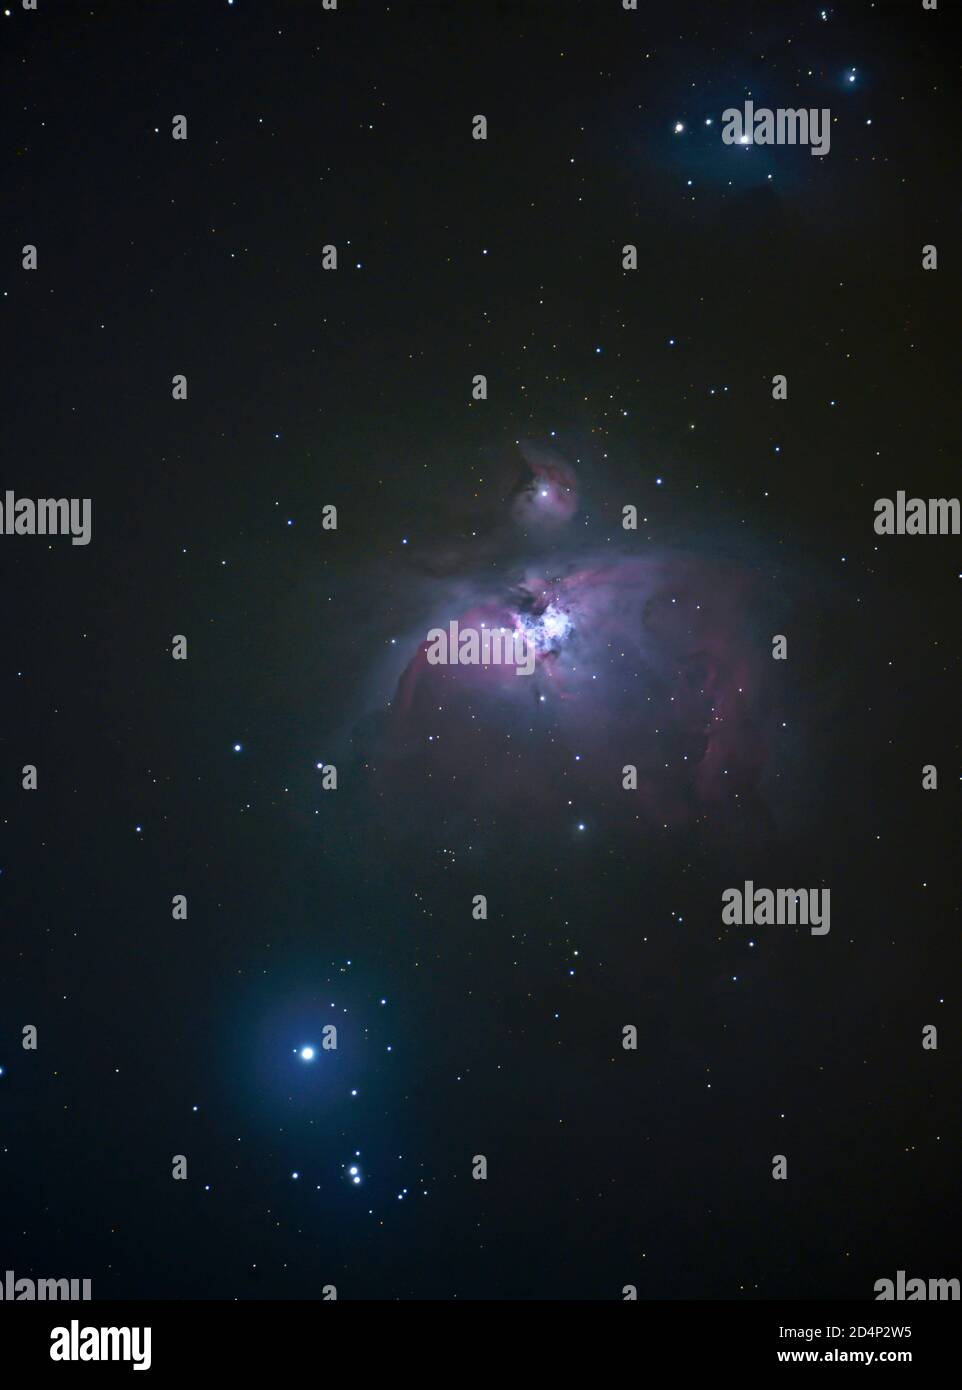 The Orion Nebula, M42, a diffuse nebula photographed from London, UK, 10 October 2020 with multiple long exposures with standard Nikon Z7 camera and 5' refracting telescope. Also visible is M43 and (top) NGC 1977, The Running Man Nebula. The blue star lower left is double star Nair al Saif. The Orion Nebula is approx 1,600 light years from planet Earth. Credit: Malcolm Park/Alamy. Stock Photo